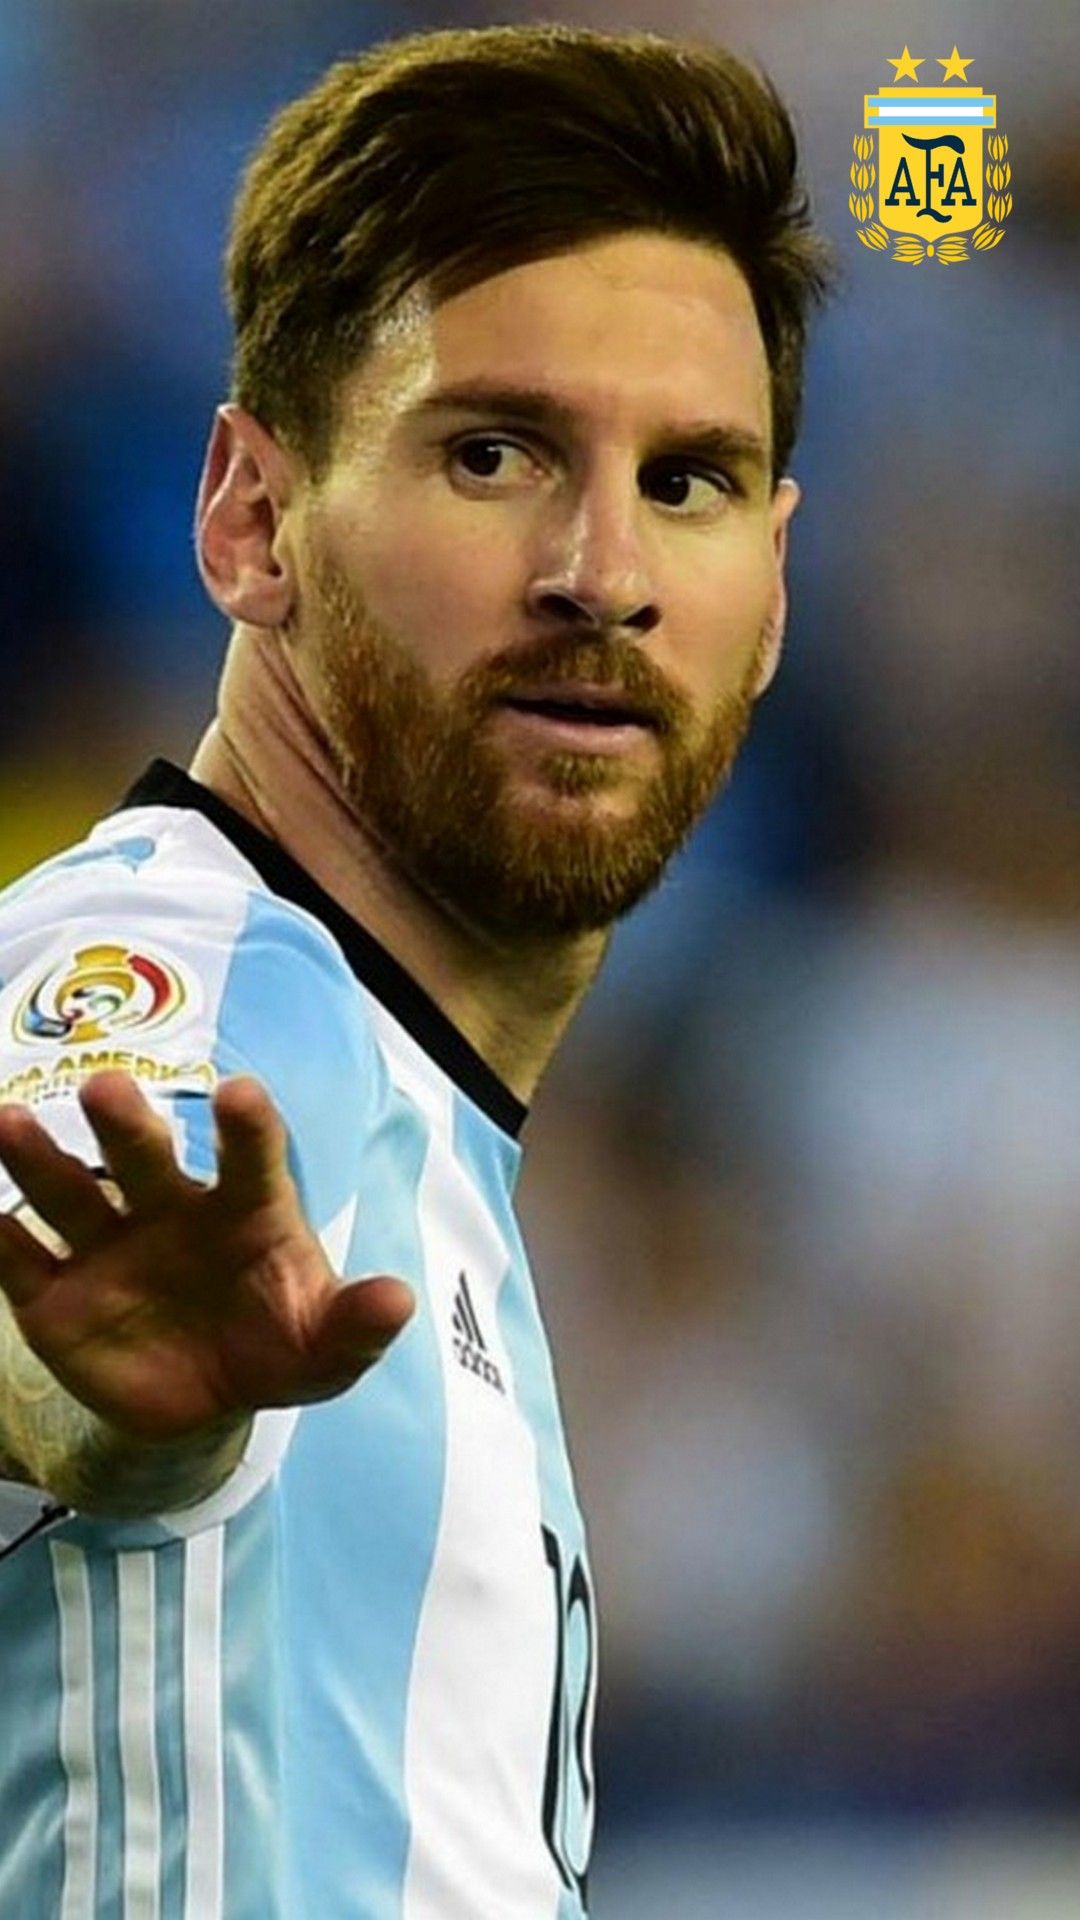 Wallpaper Android Messi Argentina Android Wallpaper